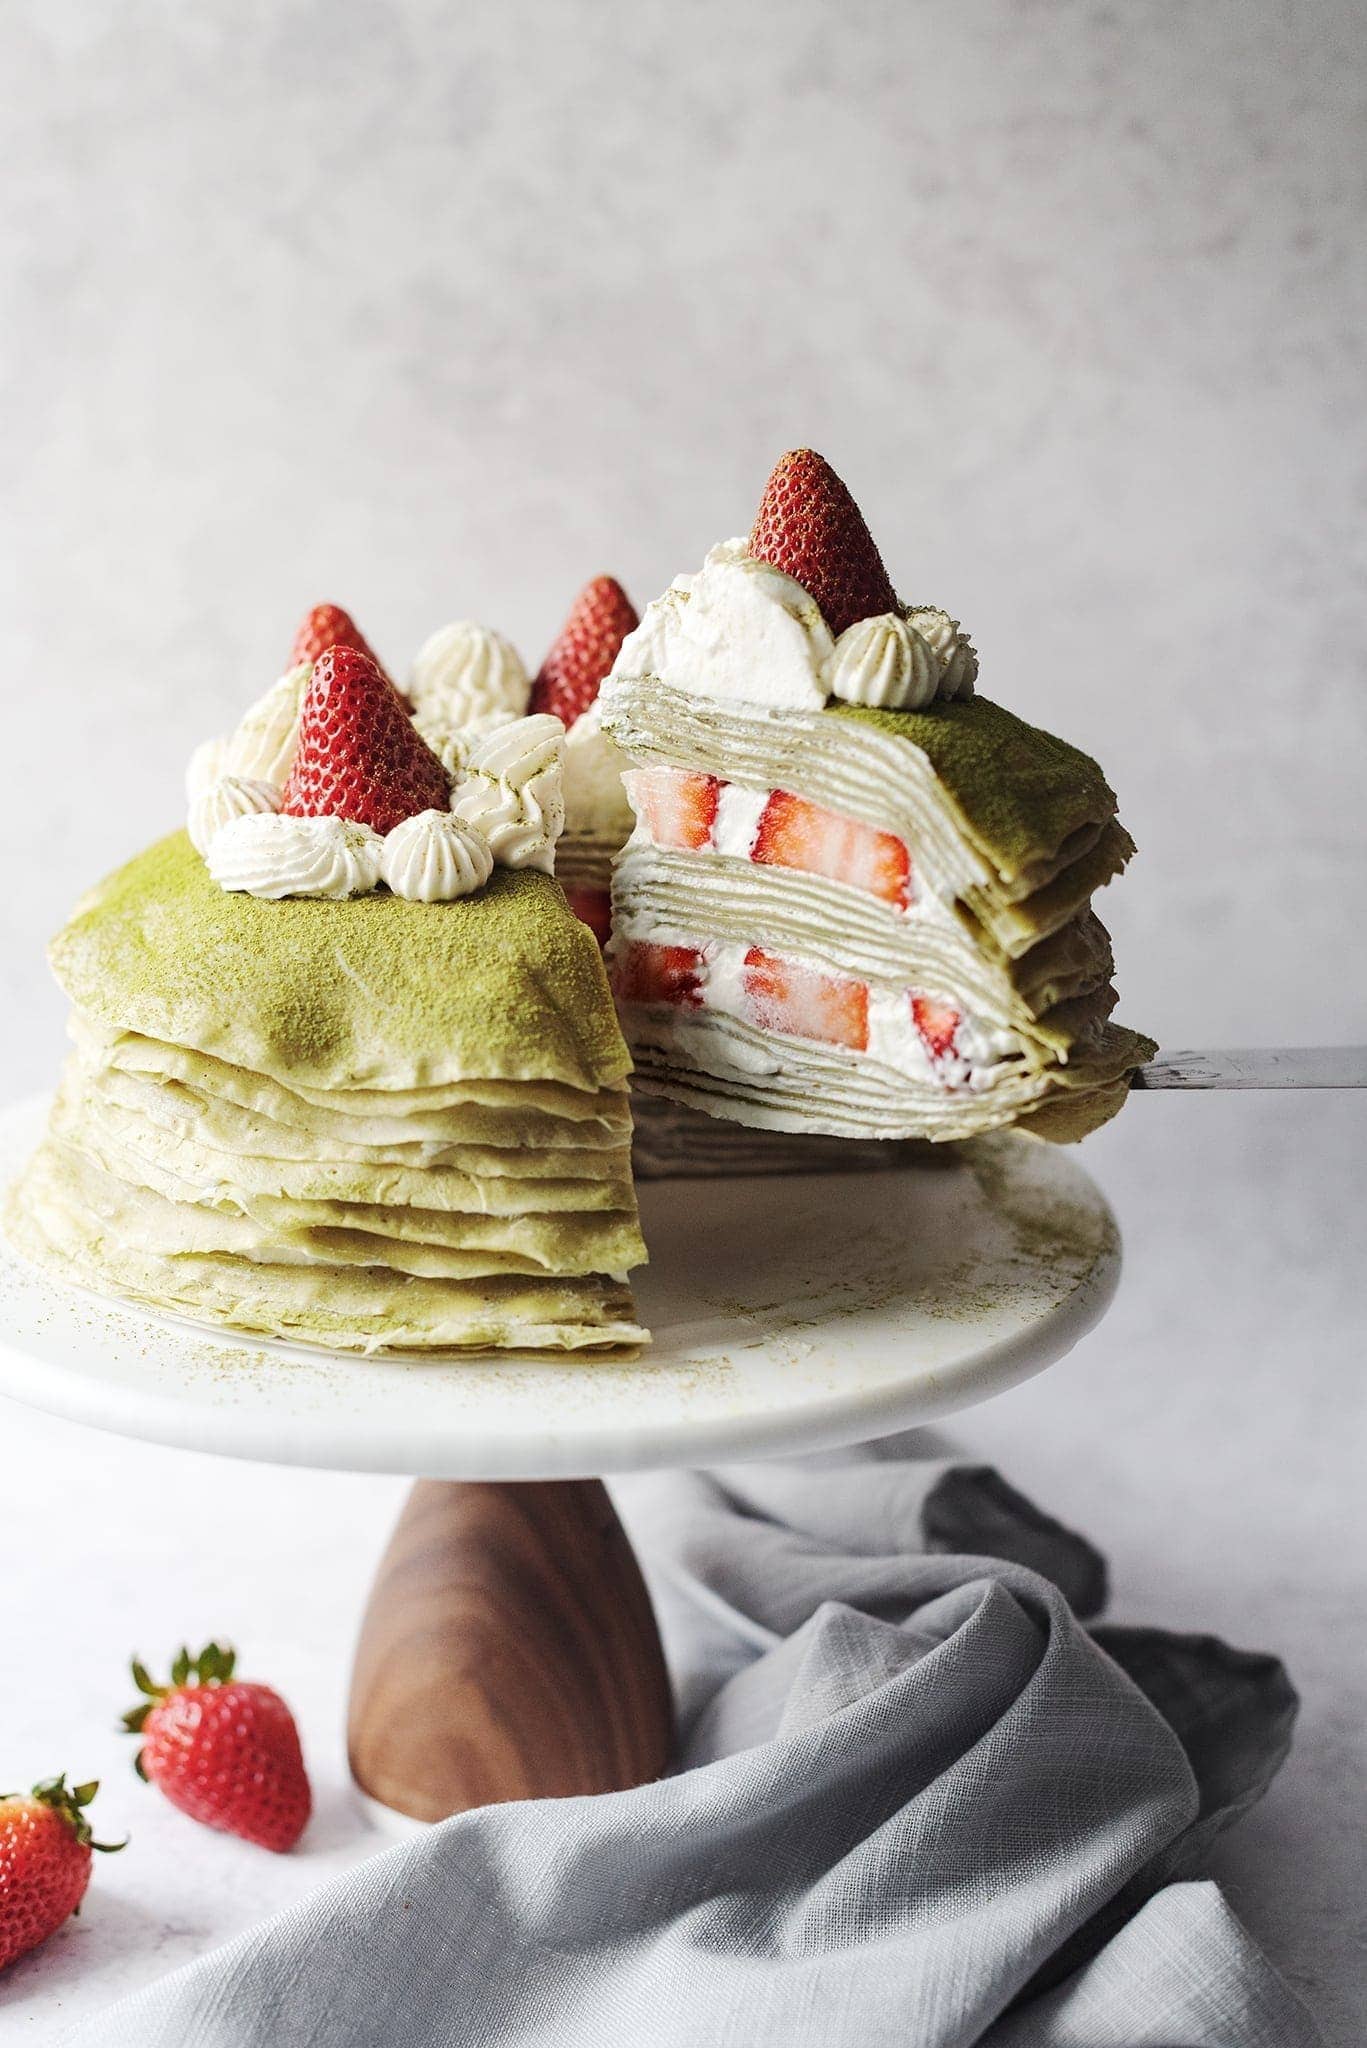 Stack of matcha crepe with strawberry creme filling.